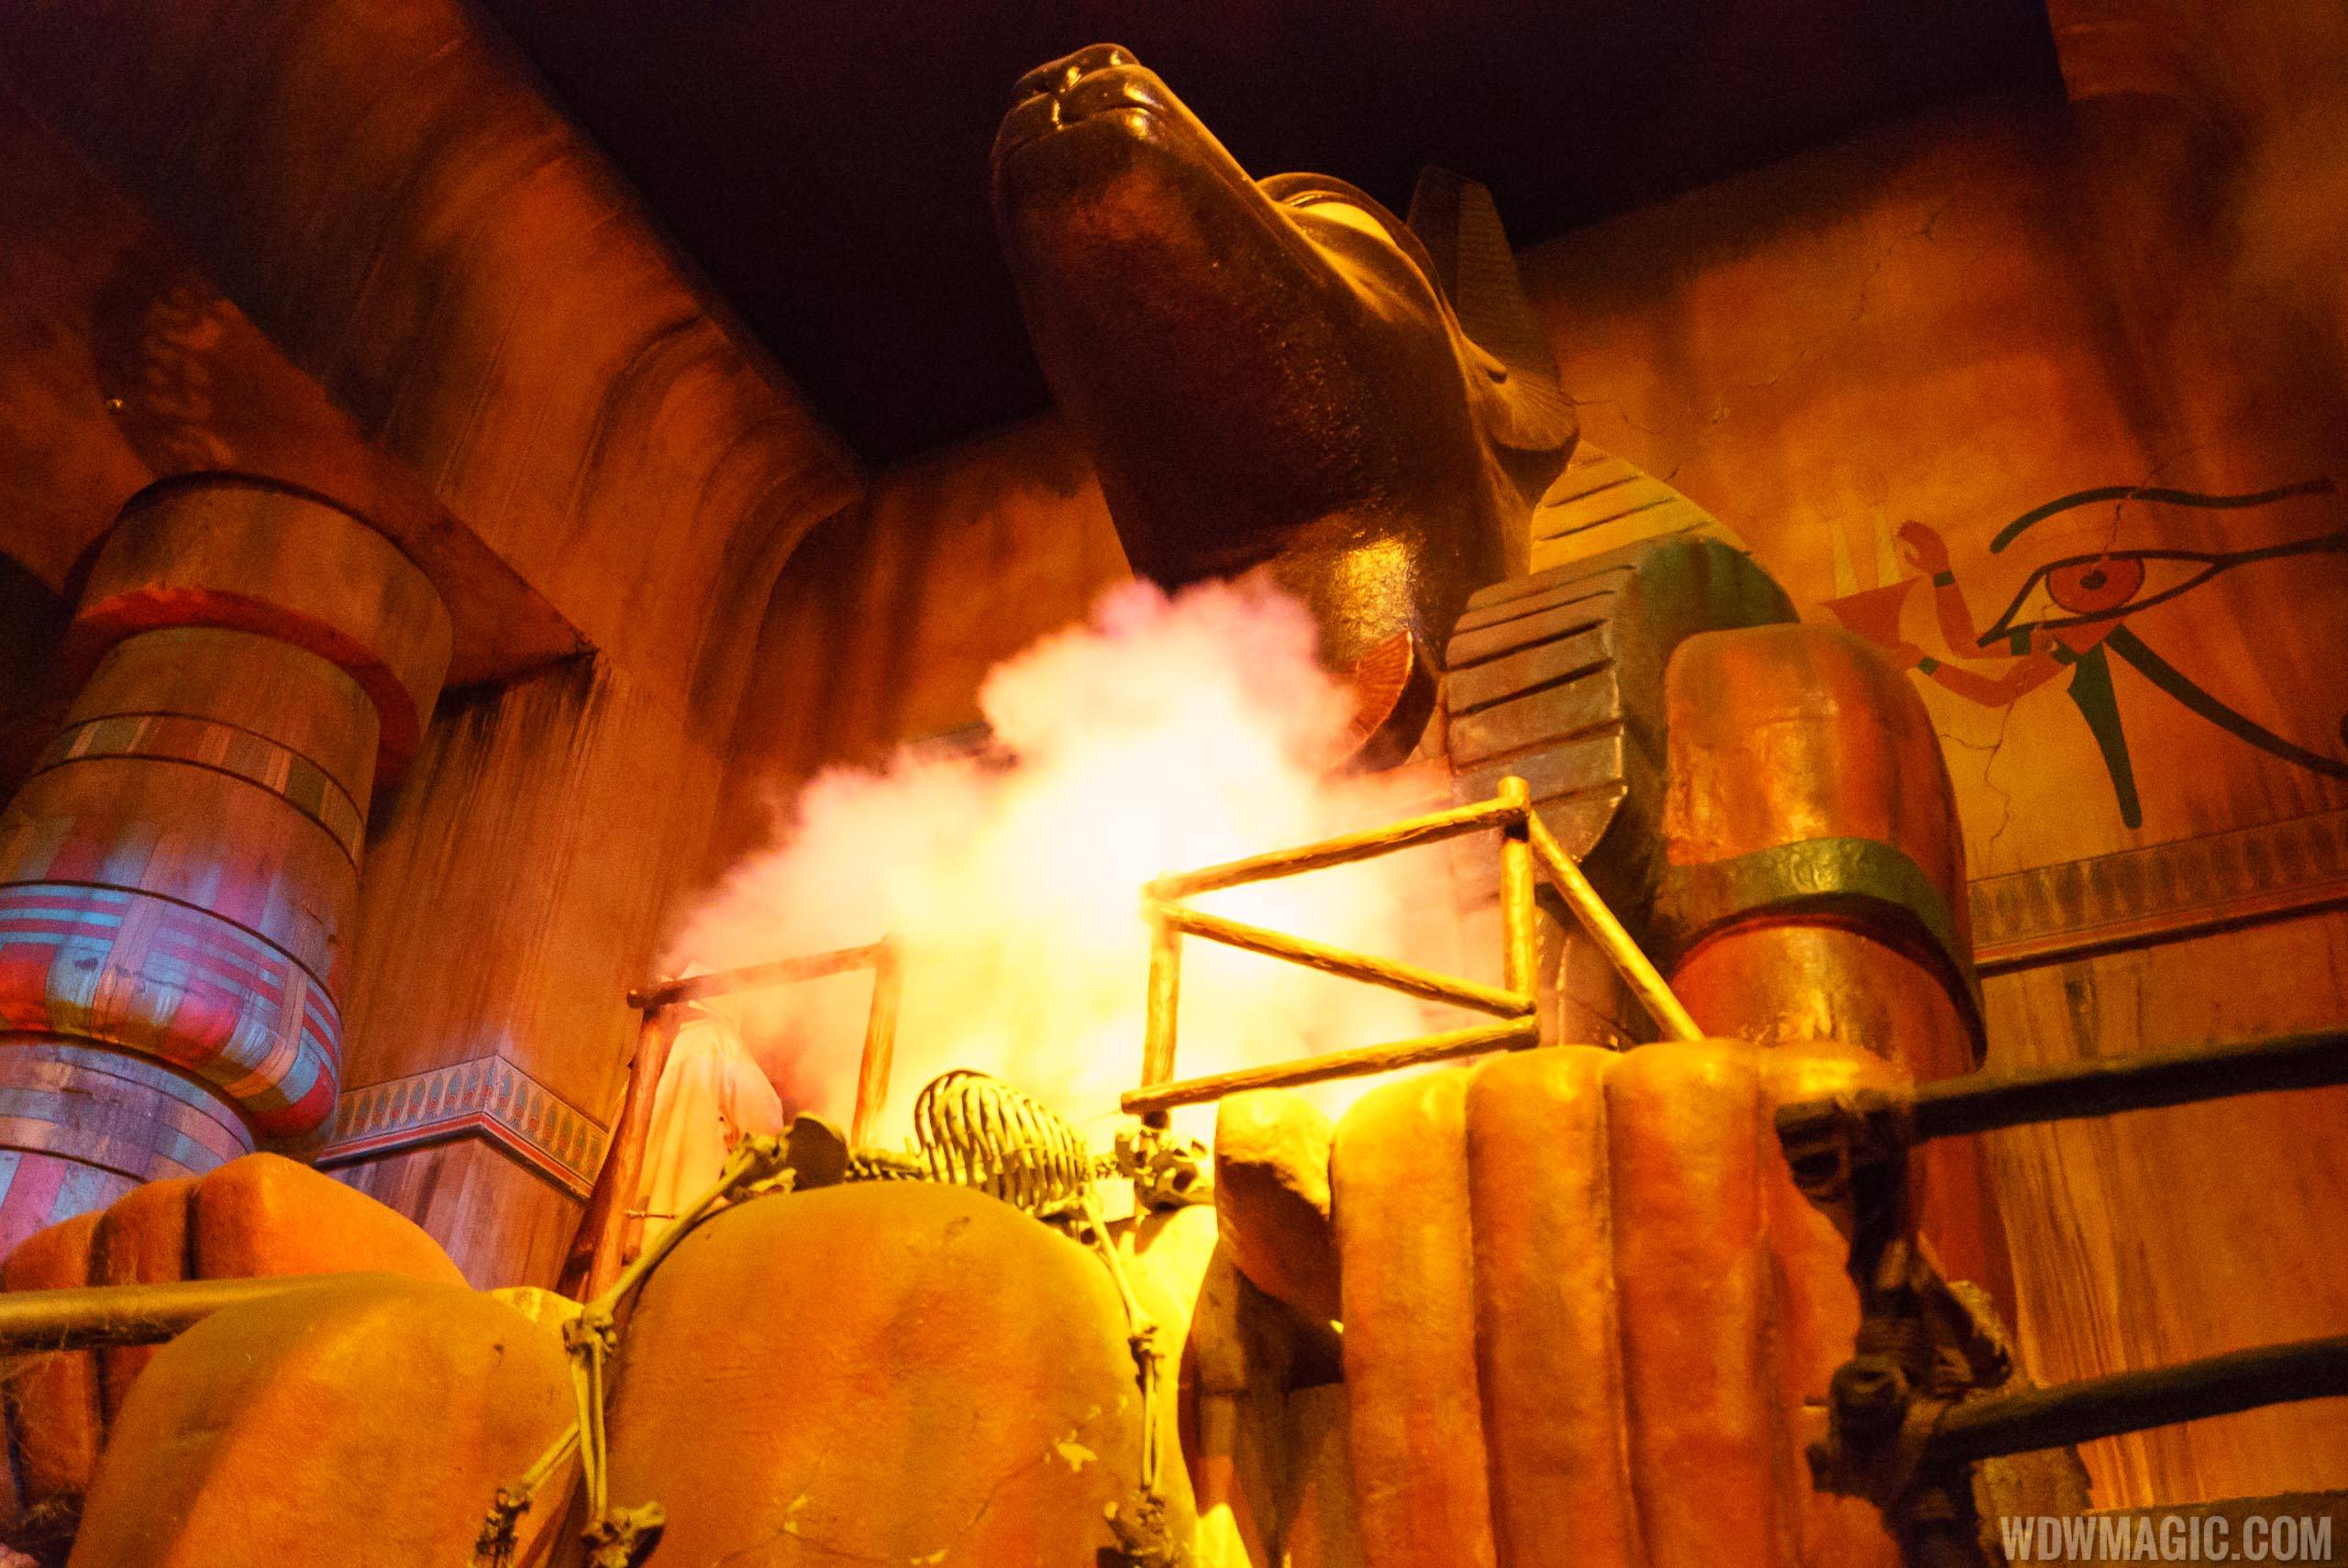 Complete tour of The Great Movie Ride